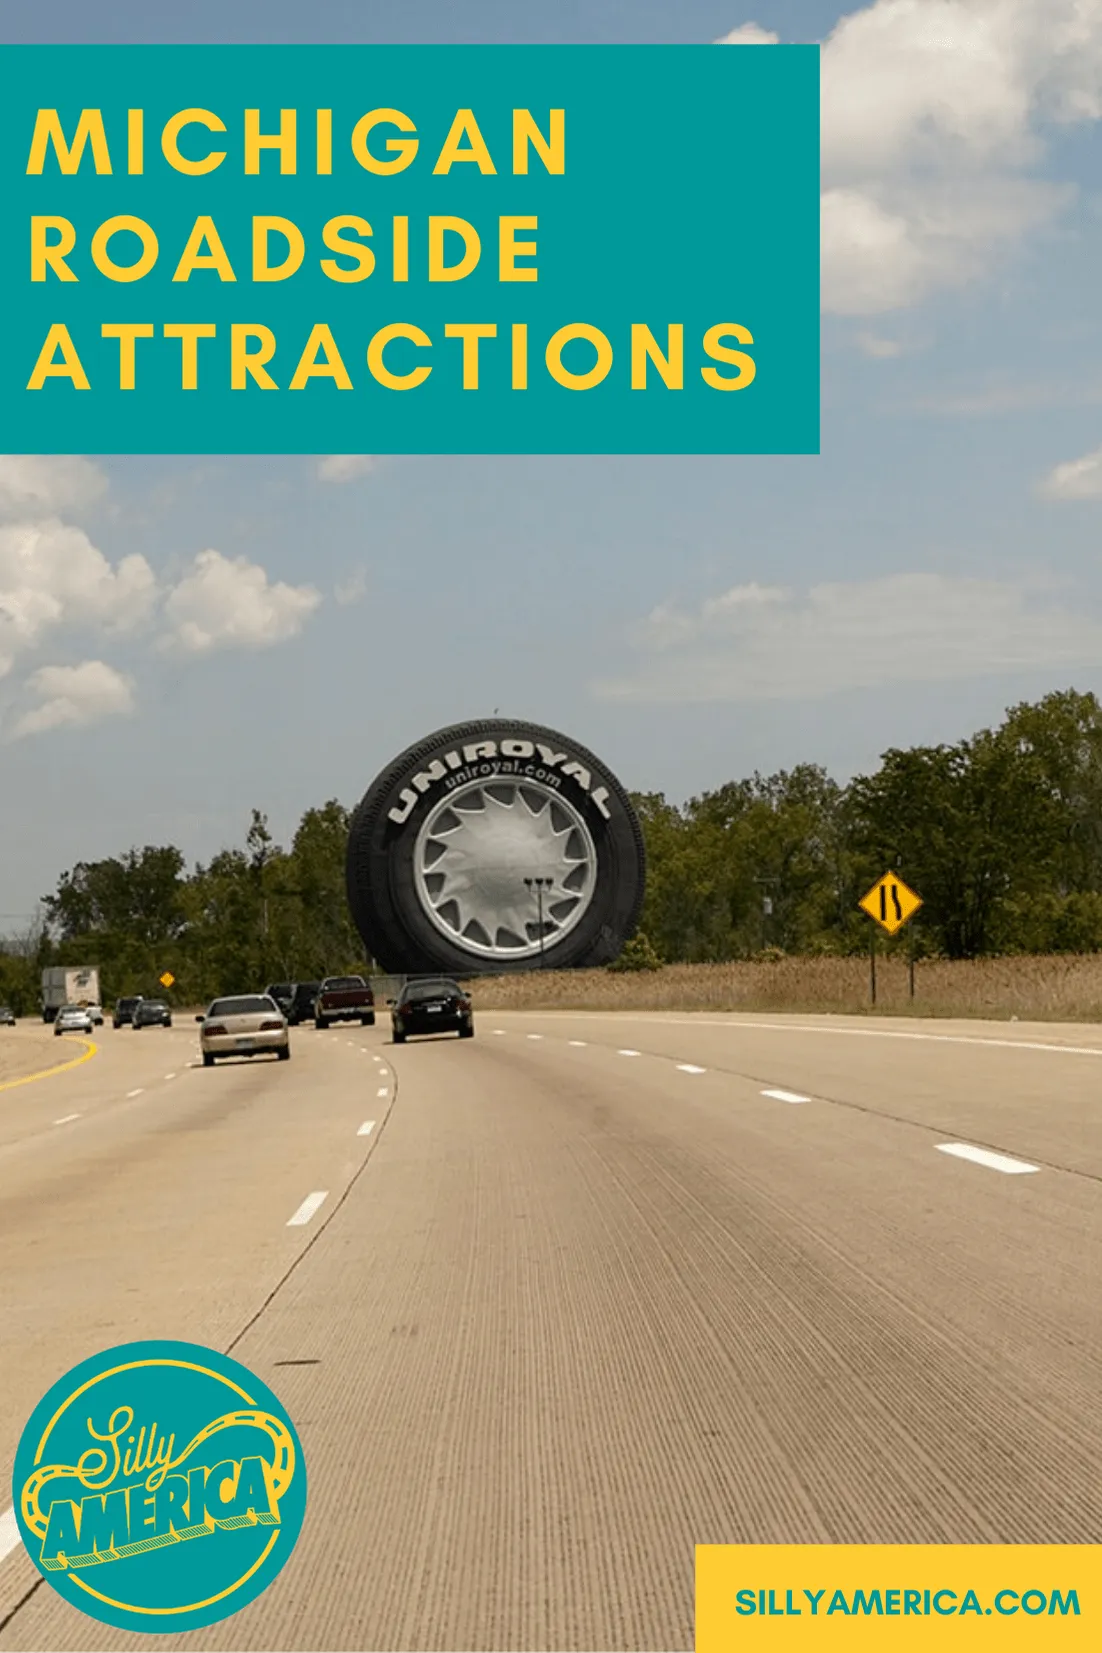 The best Michigan roadside attractions to visit on a Michigan road trip or weekend getaway. Add these roadside oddities to your travel bucket list or road trip itinerary!  #MichiganRoadsideAttractions #MichiganRoadsideAttraction #RoadsideAttractions #RoadsideAttraction #RoadTrip #MichiganRoadTrip #MichiganWeekendGetaways #MichiganSummerRoadTrip #UpperPeninsulaRoadTrip #MichiganRoadTripPlacesToVisit#MichiganRoadTripIdeas #MichiganRoadTripDestinations #MichiganRoadTripMap